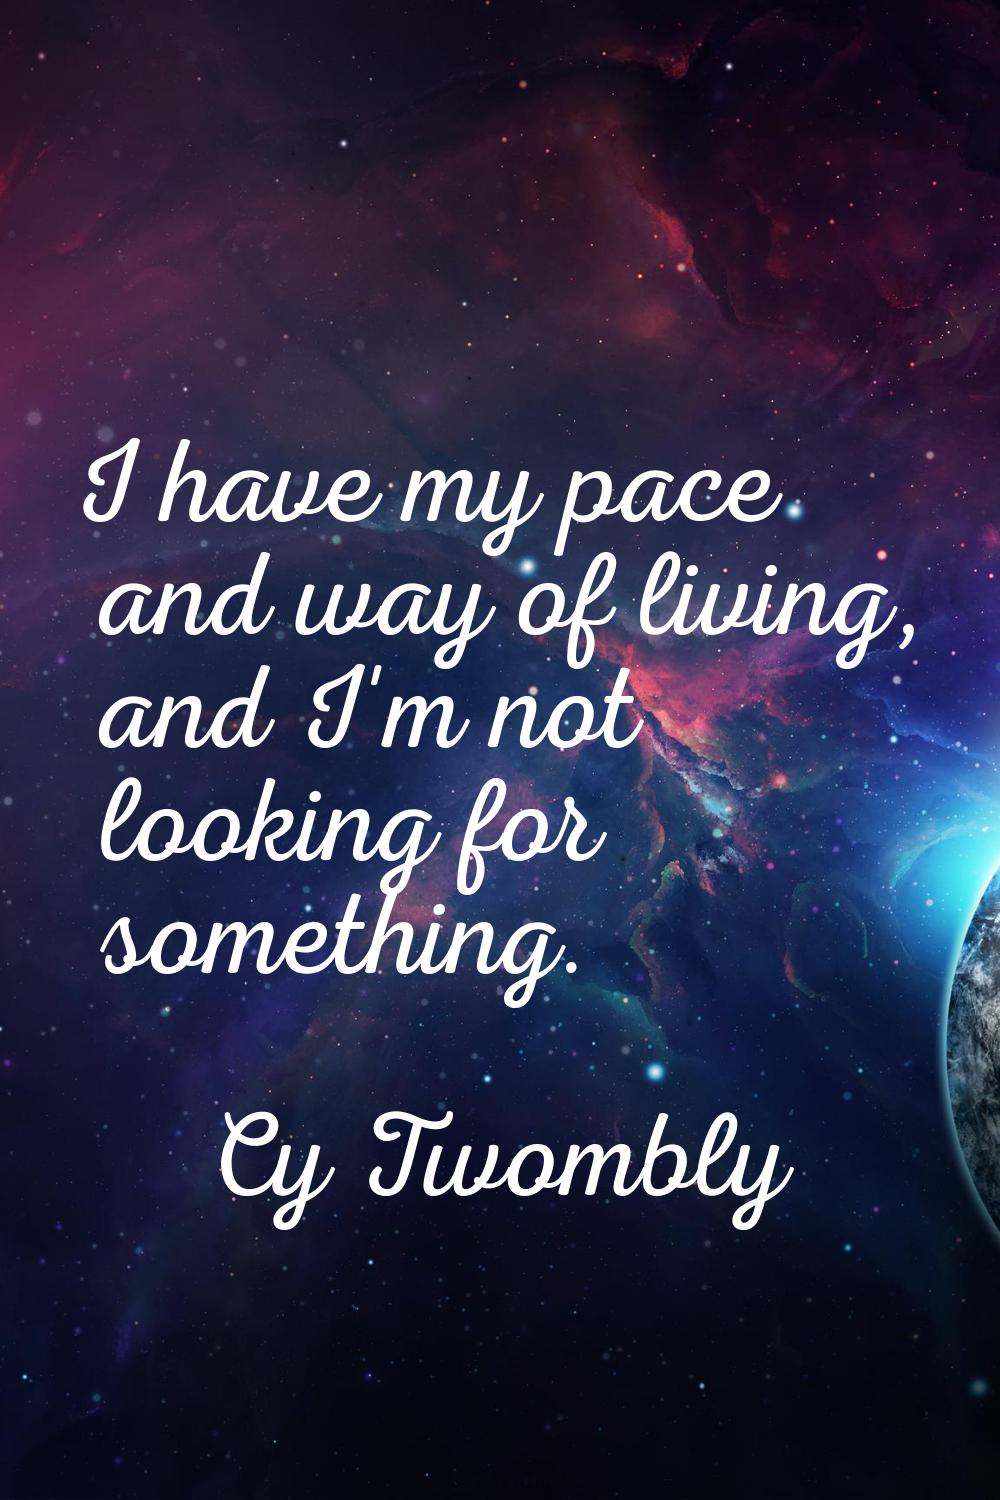 I have my pace and way of living, and I'm not looking for something.